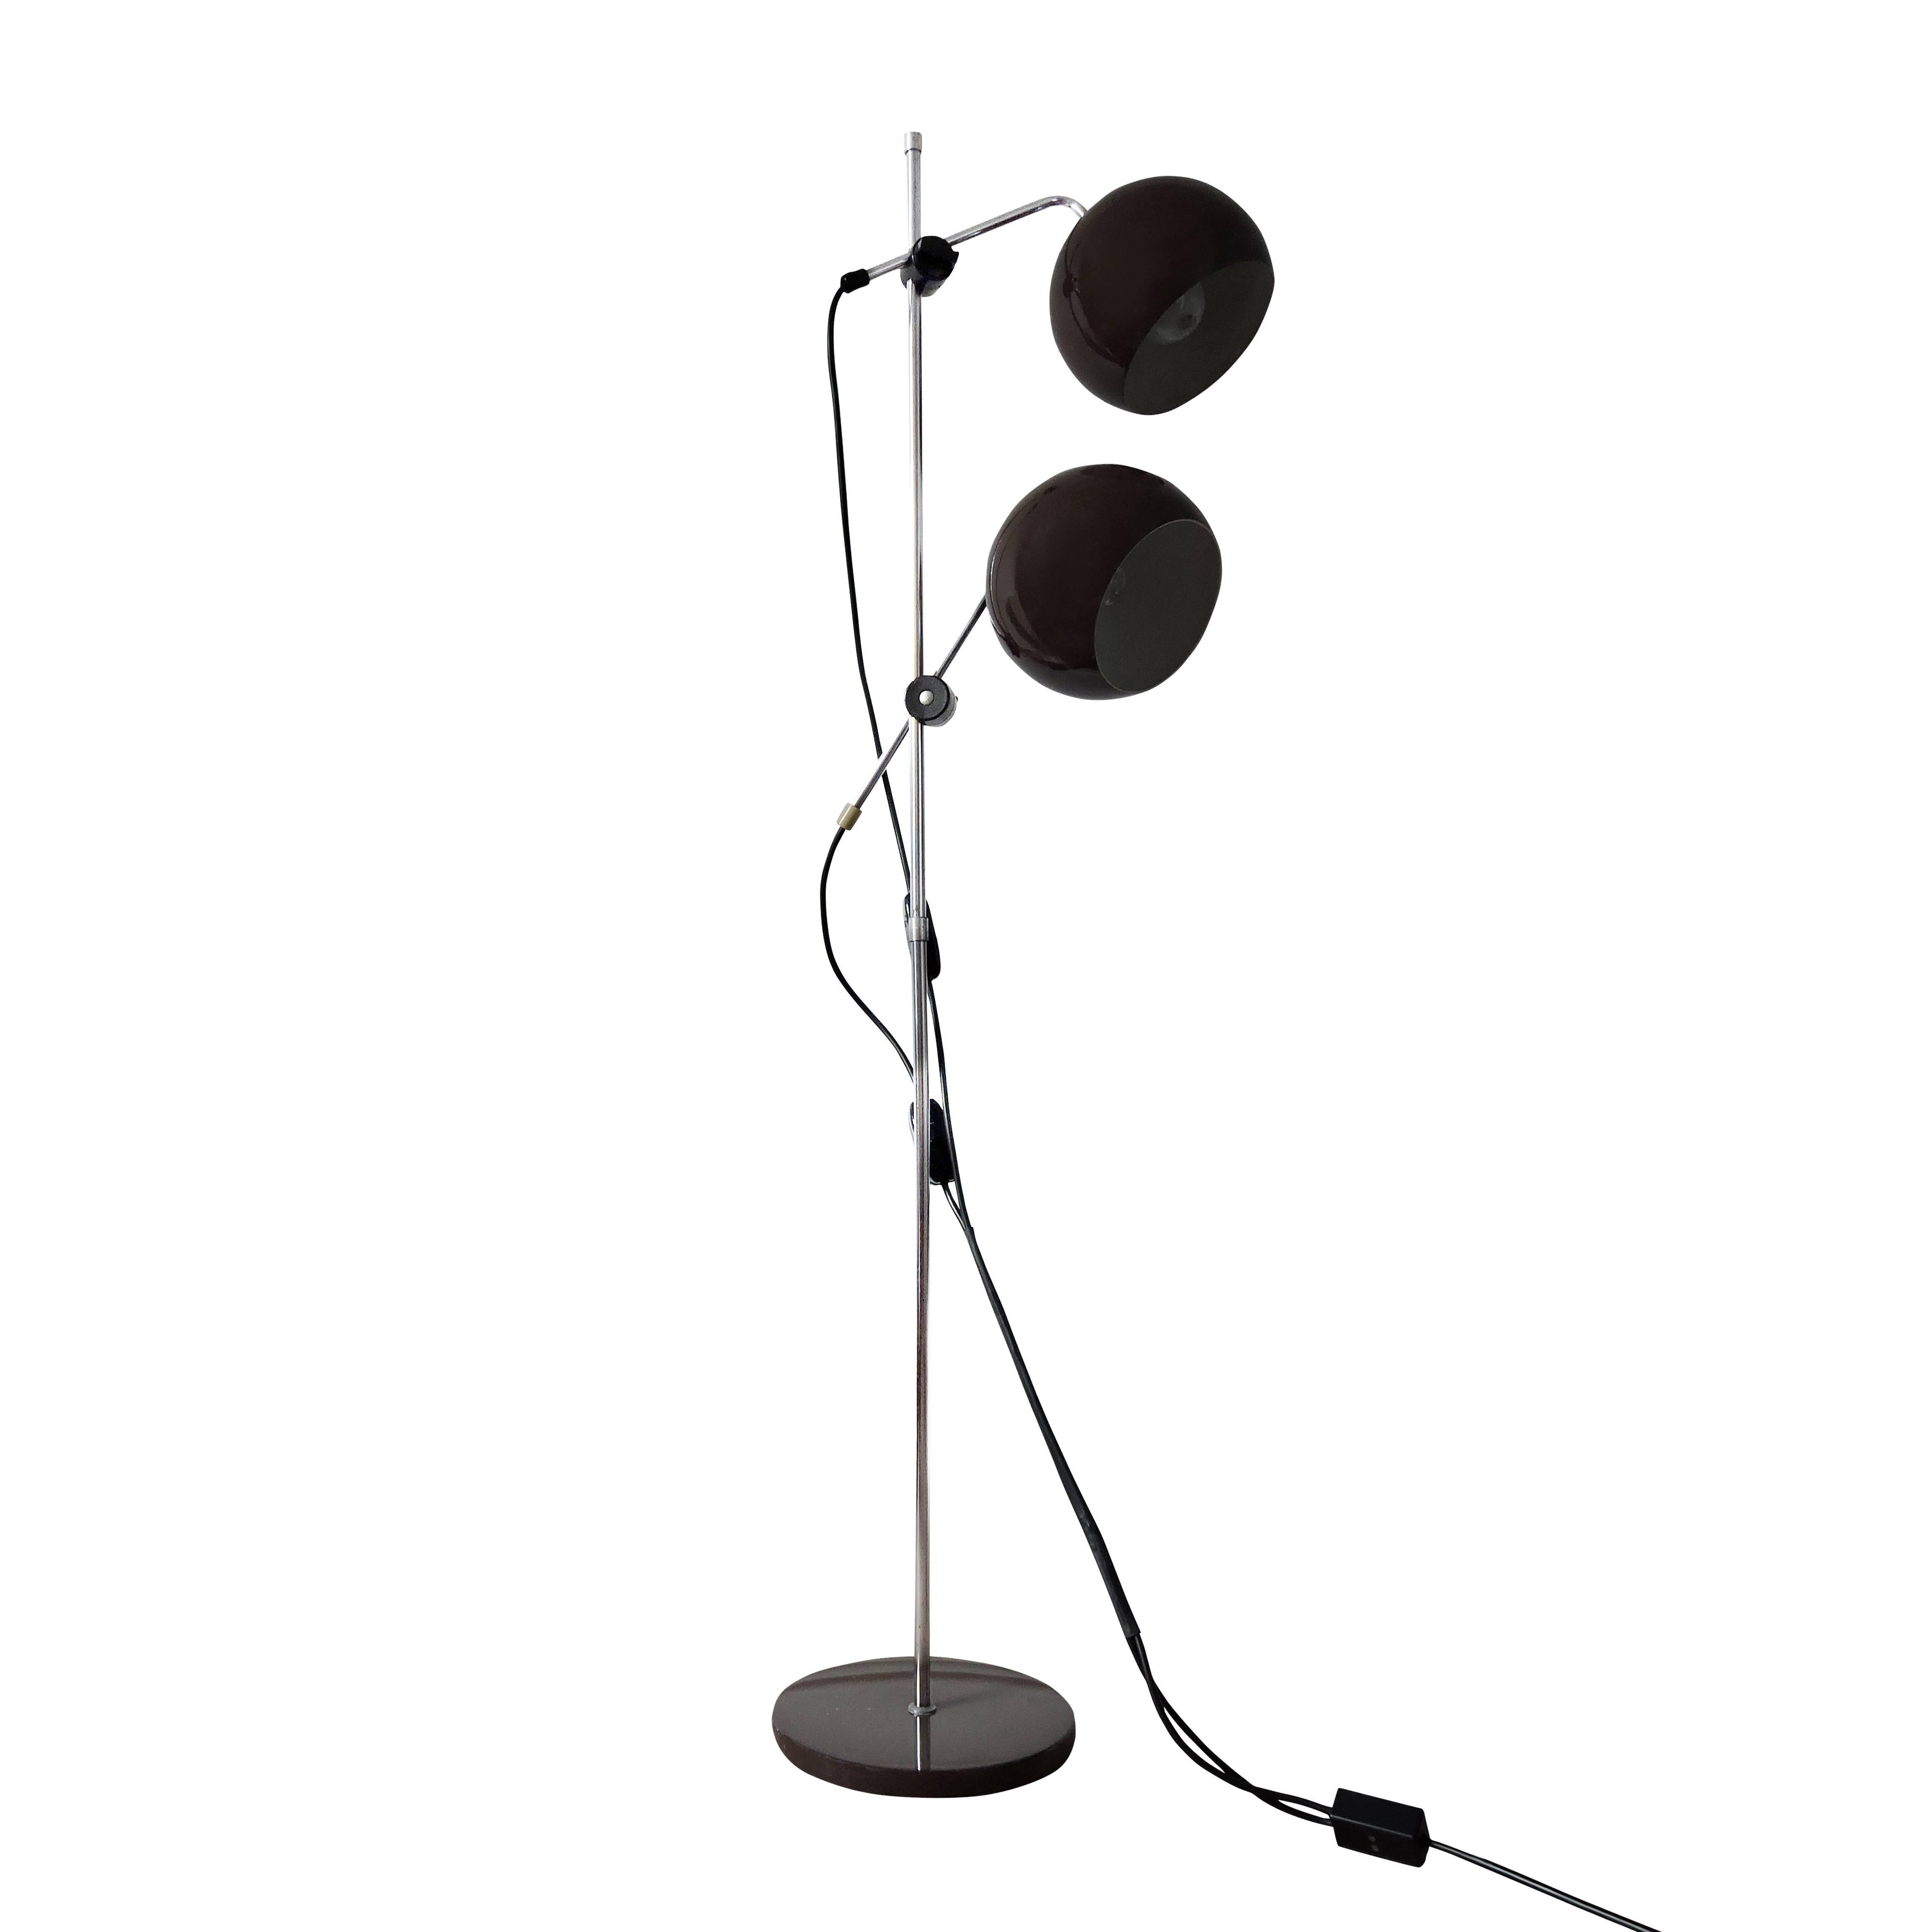 This floor lamp features two shades that can be turned in different directions.